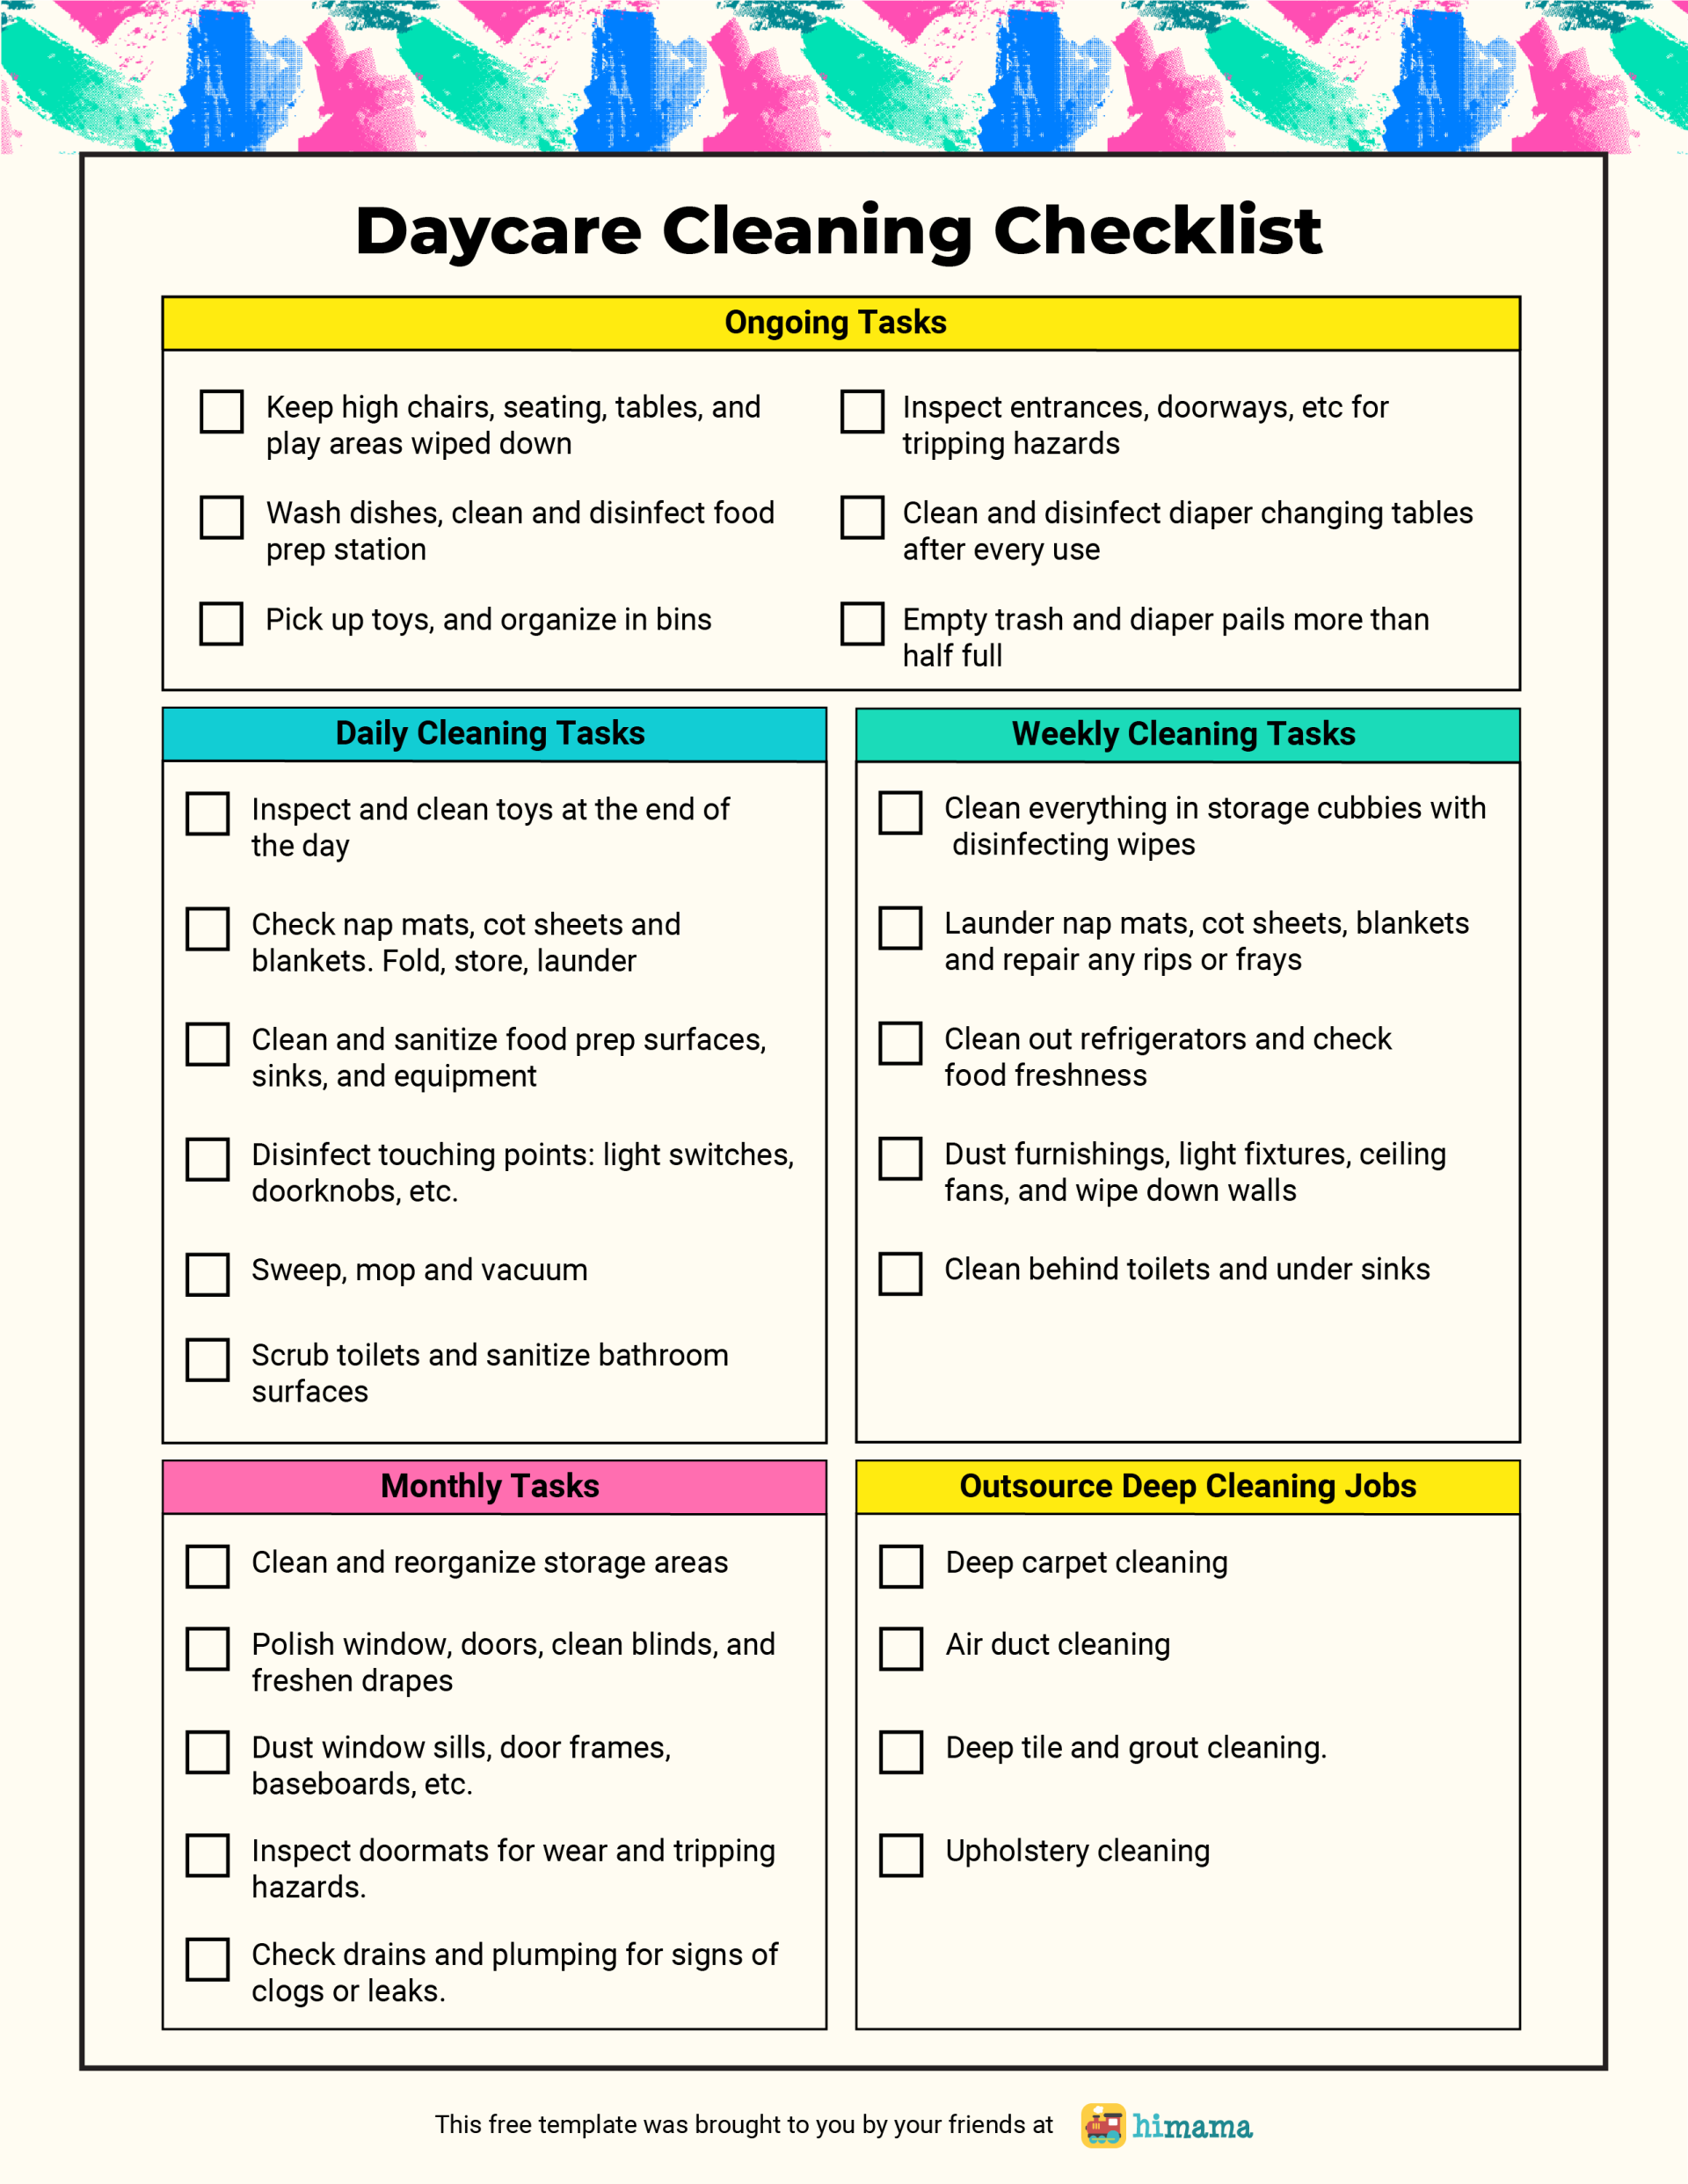 daycare-cleaning-checklist-templates-lillio